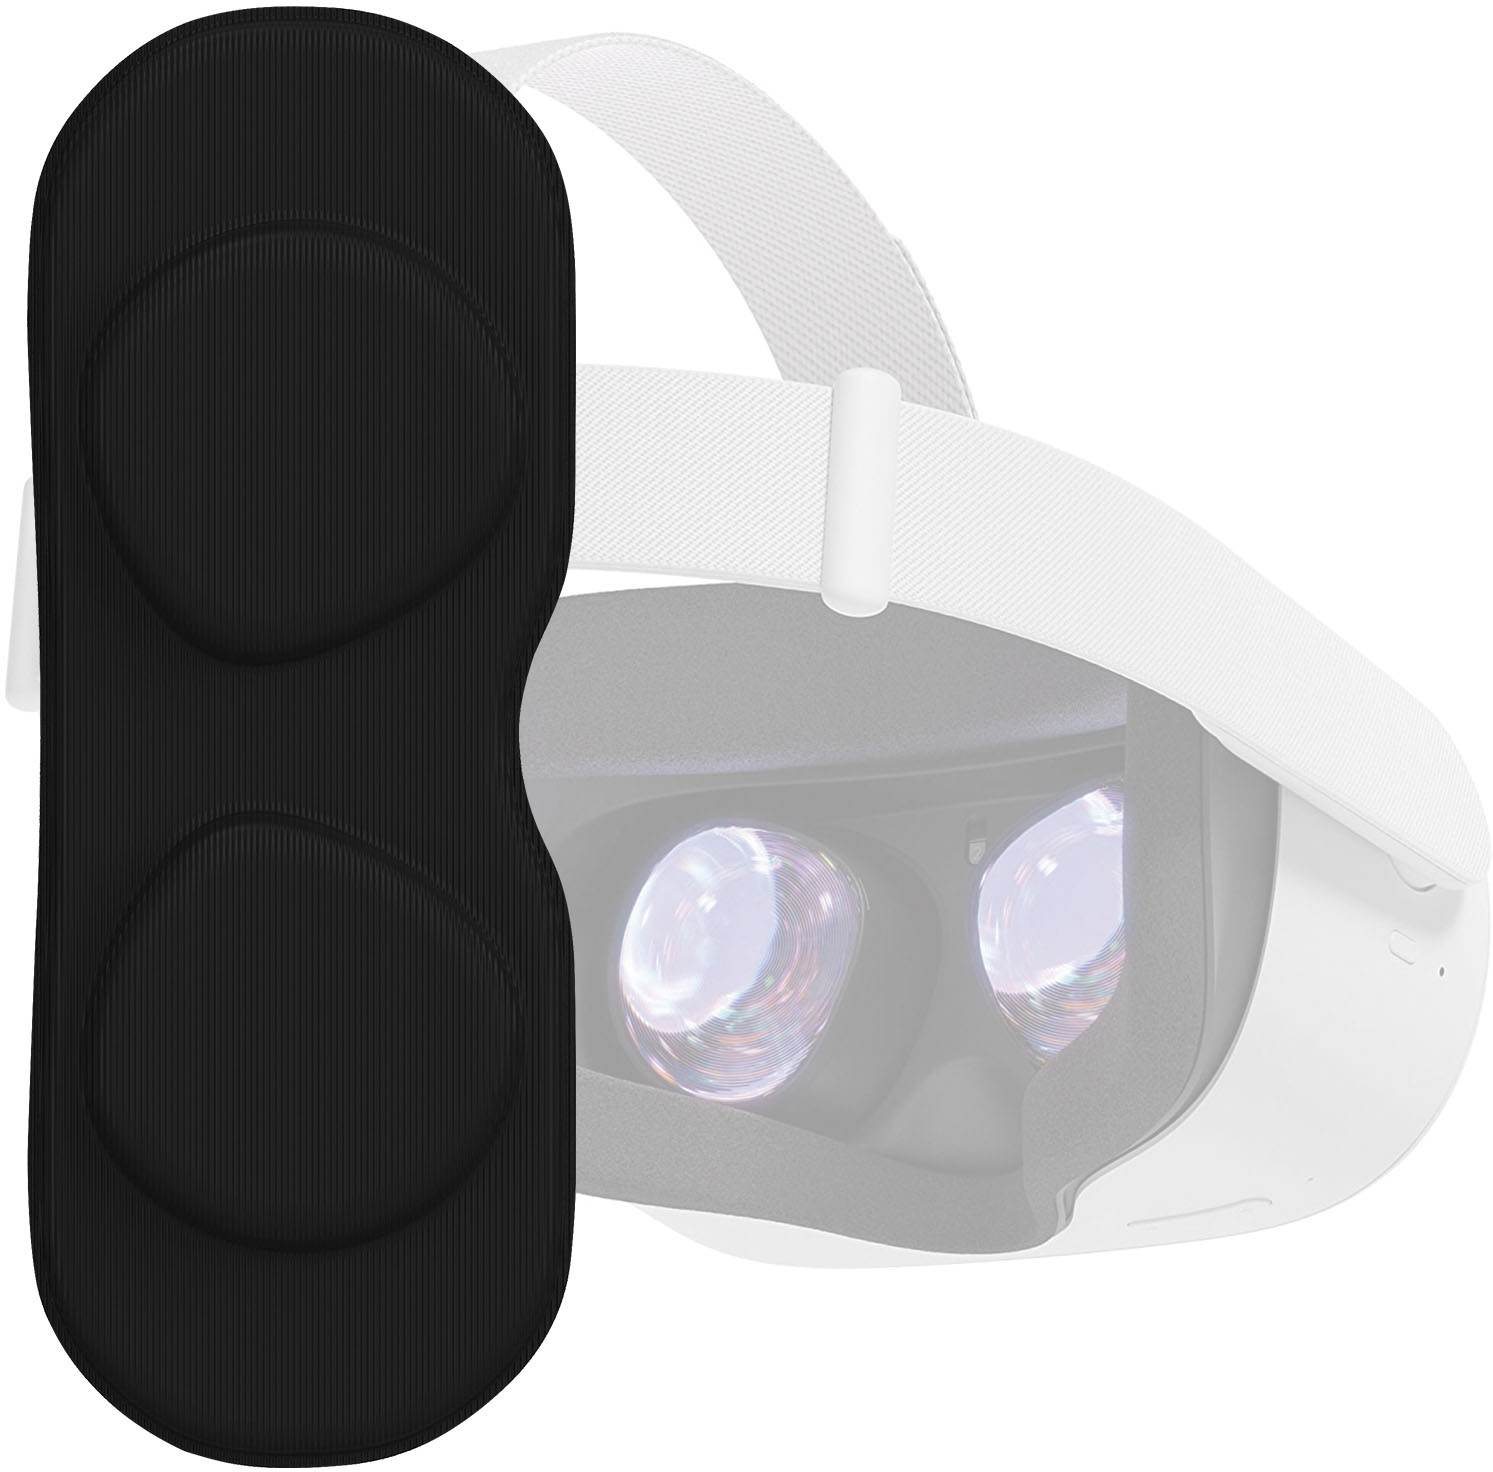 Insignia - Oculus Quest 2 Screen Protection Pad